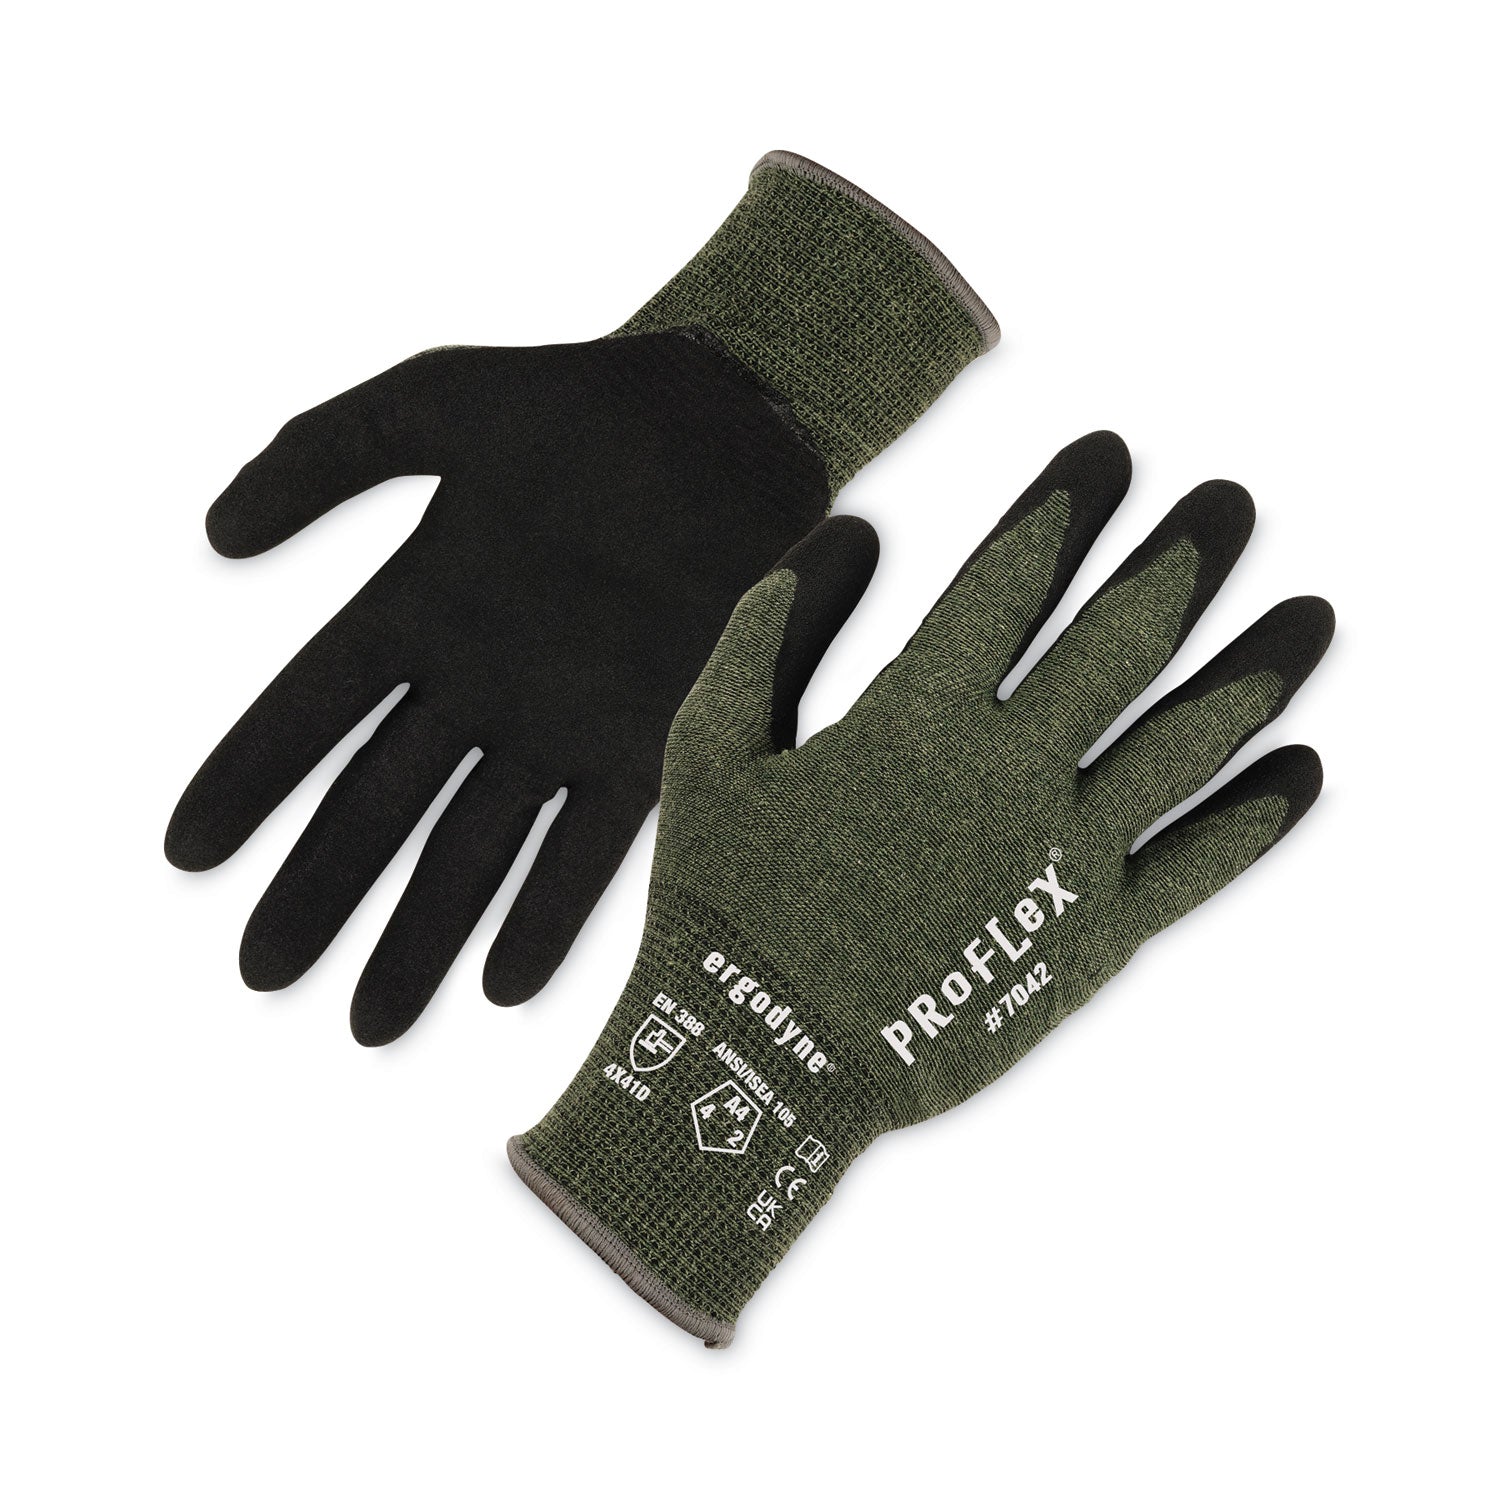 proflex-7042-ansi-a4-nitrile-coated-cr-gloves-green-x-large-pair-ships-in-1-3-business-days_ego10345 - 1